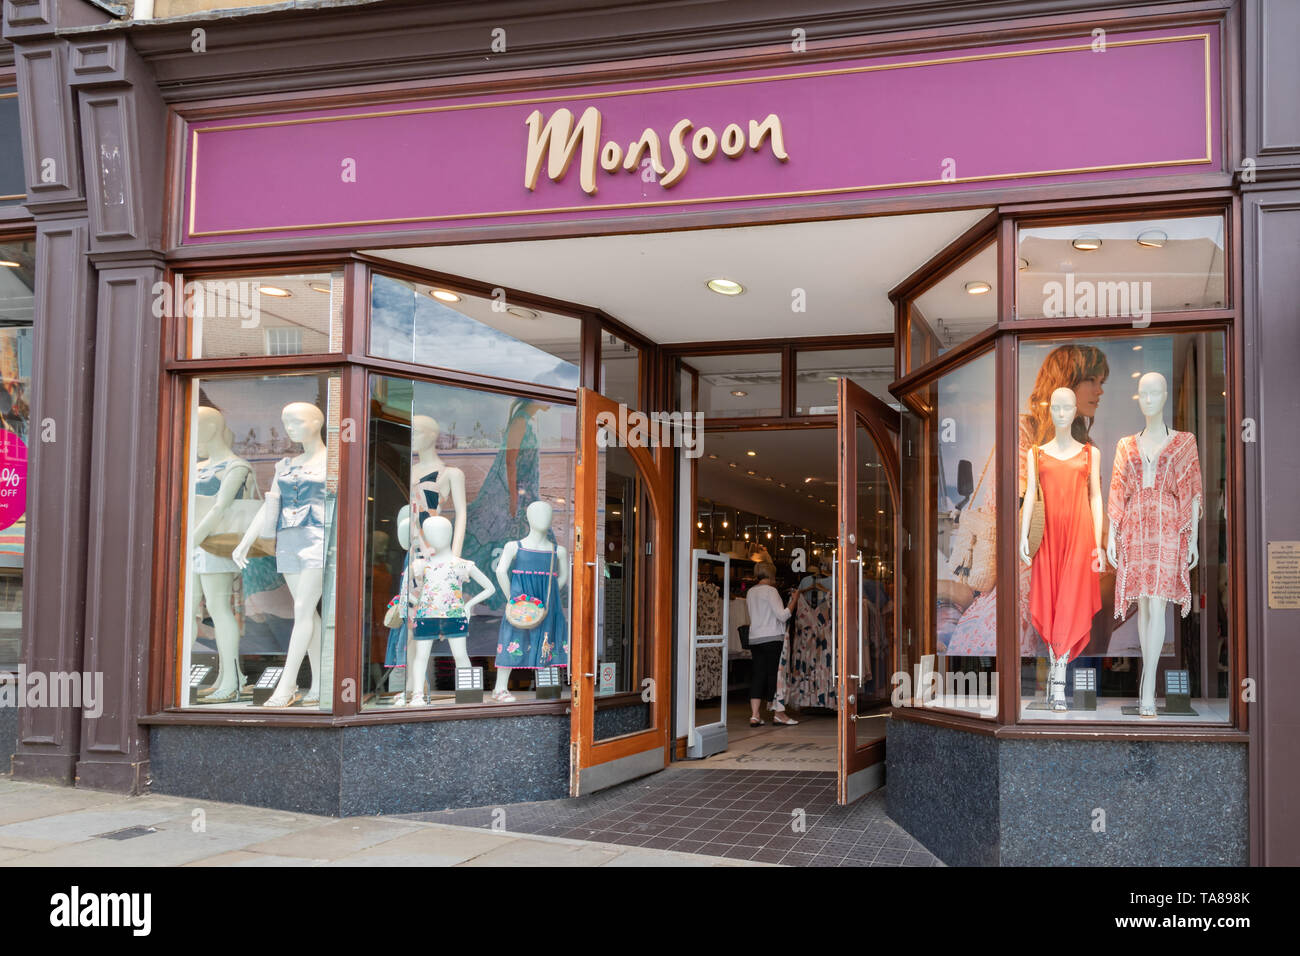 Monsoon shop front, a store selling womens and childrens clothing, on the high street in Guildford town centre, Surrey, UK Stock Photo